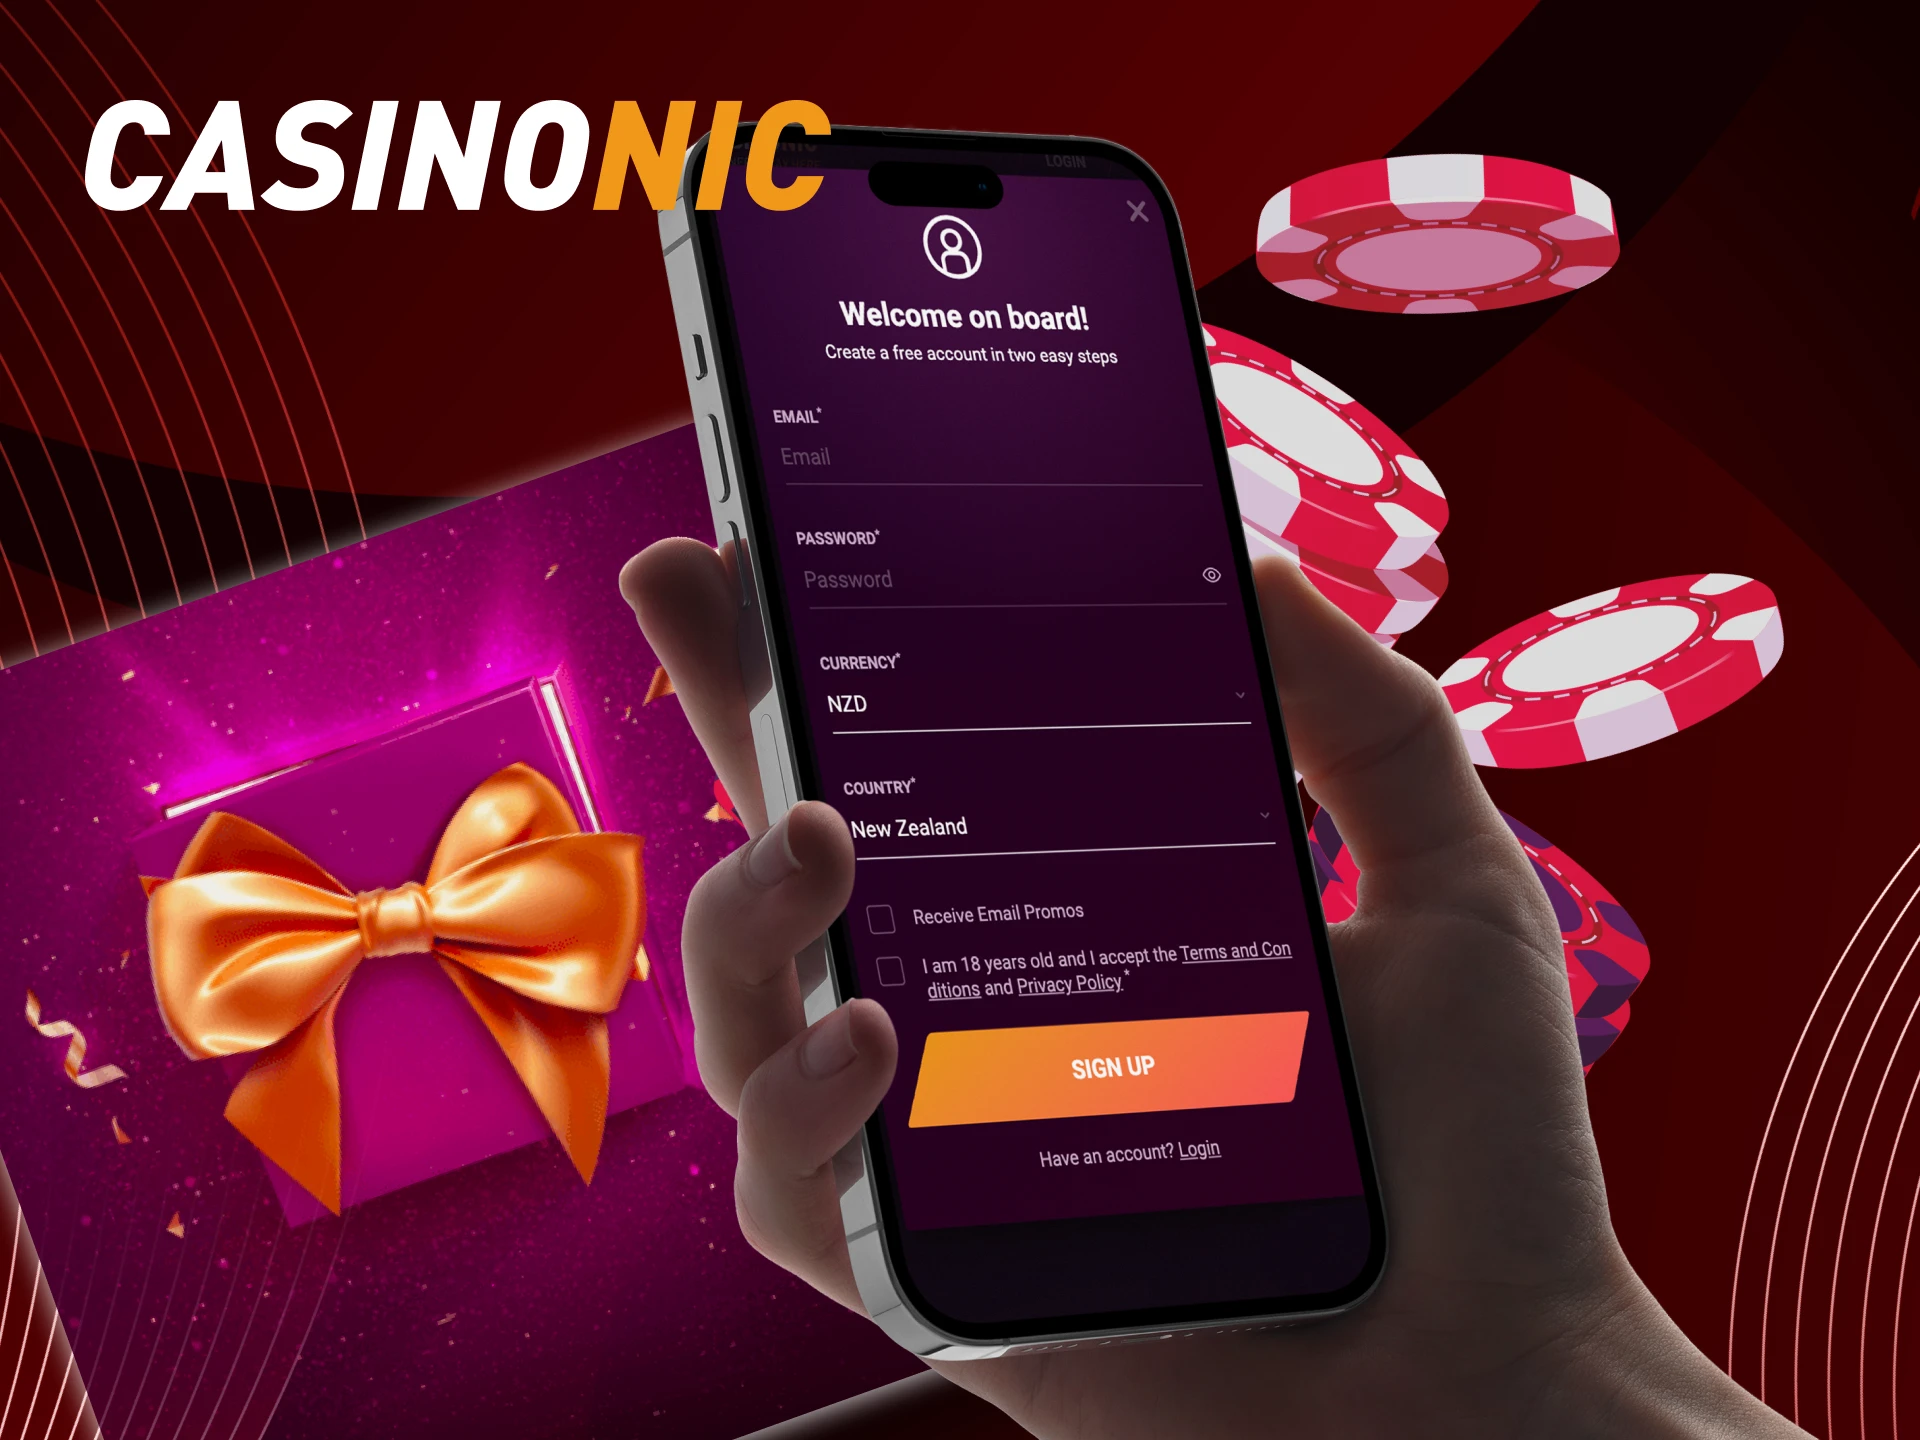 Can I create a new account in the online casino CasinoNic in the mobile application.